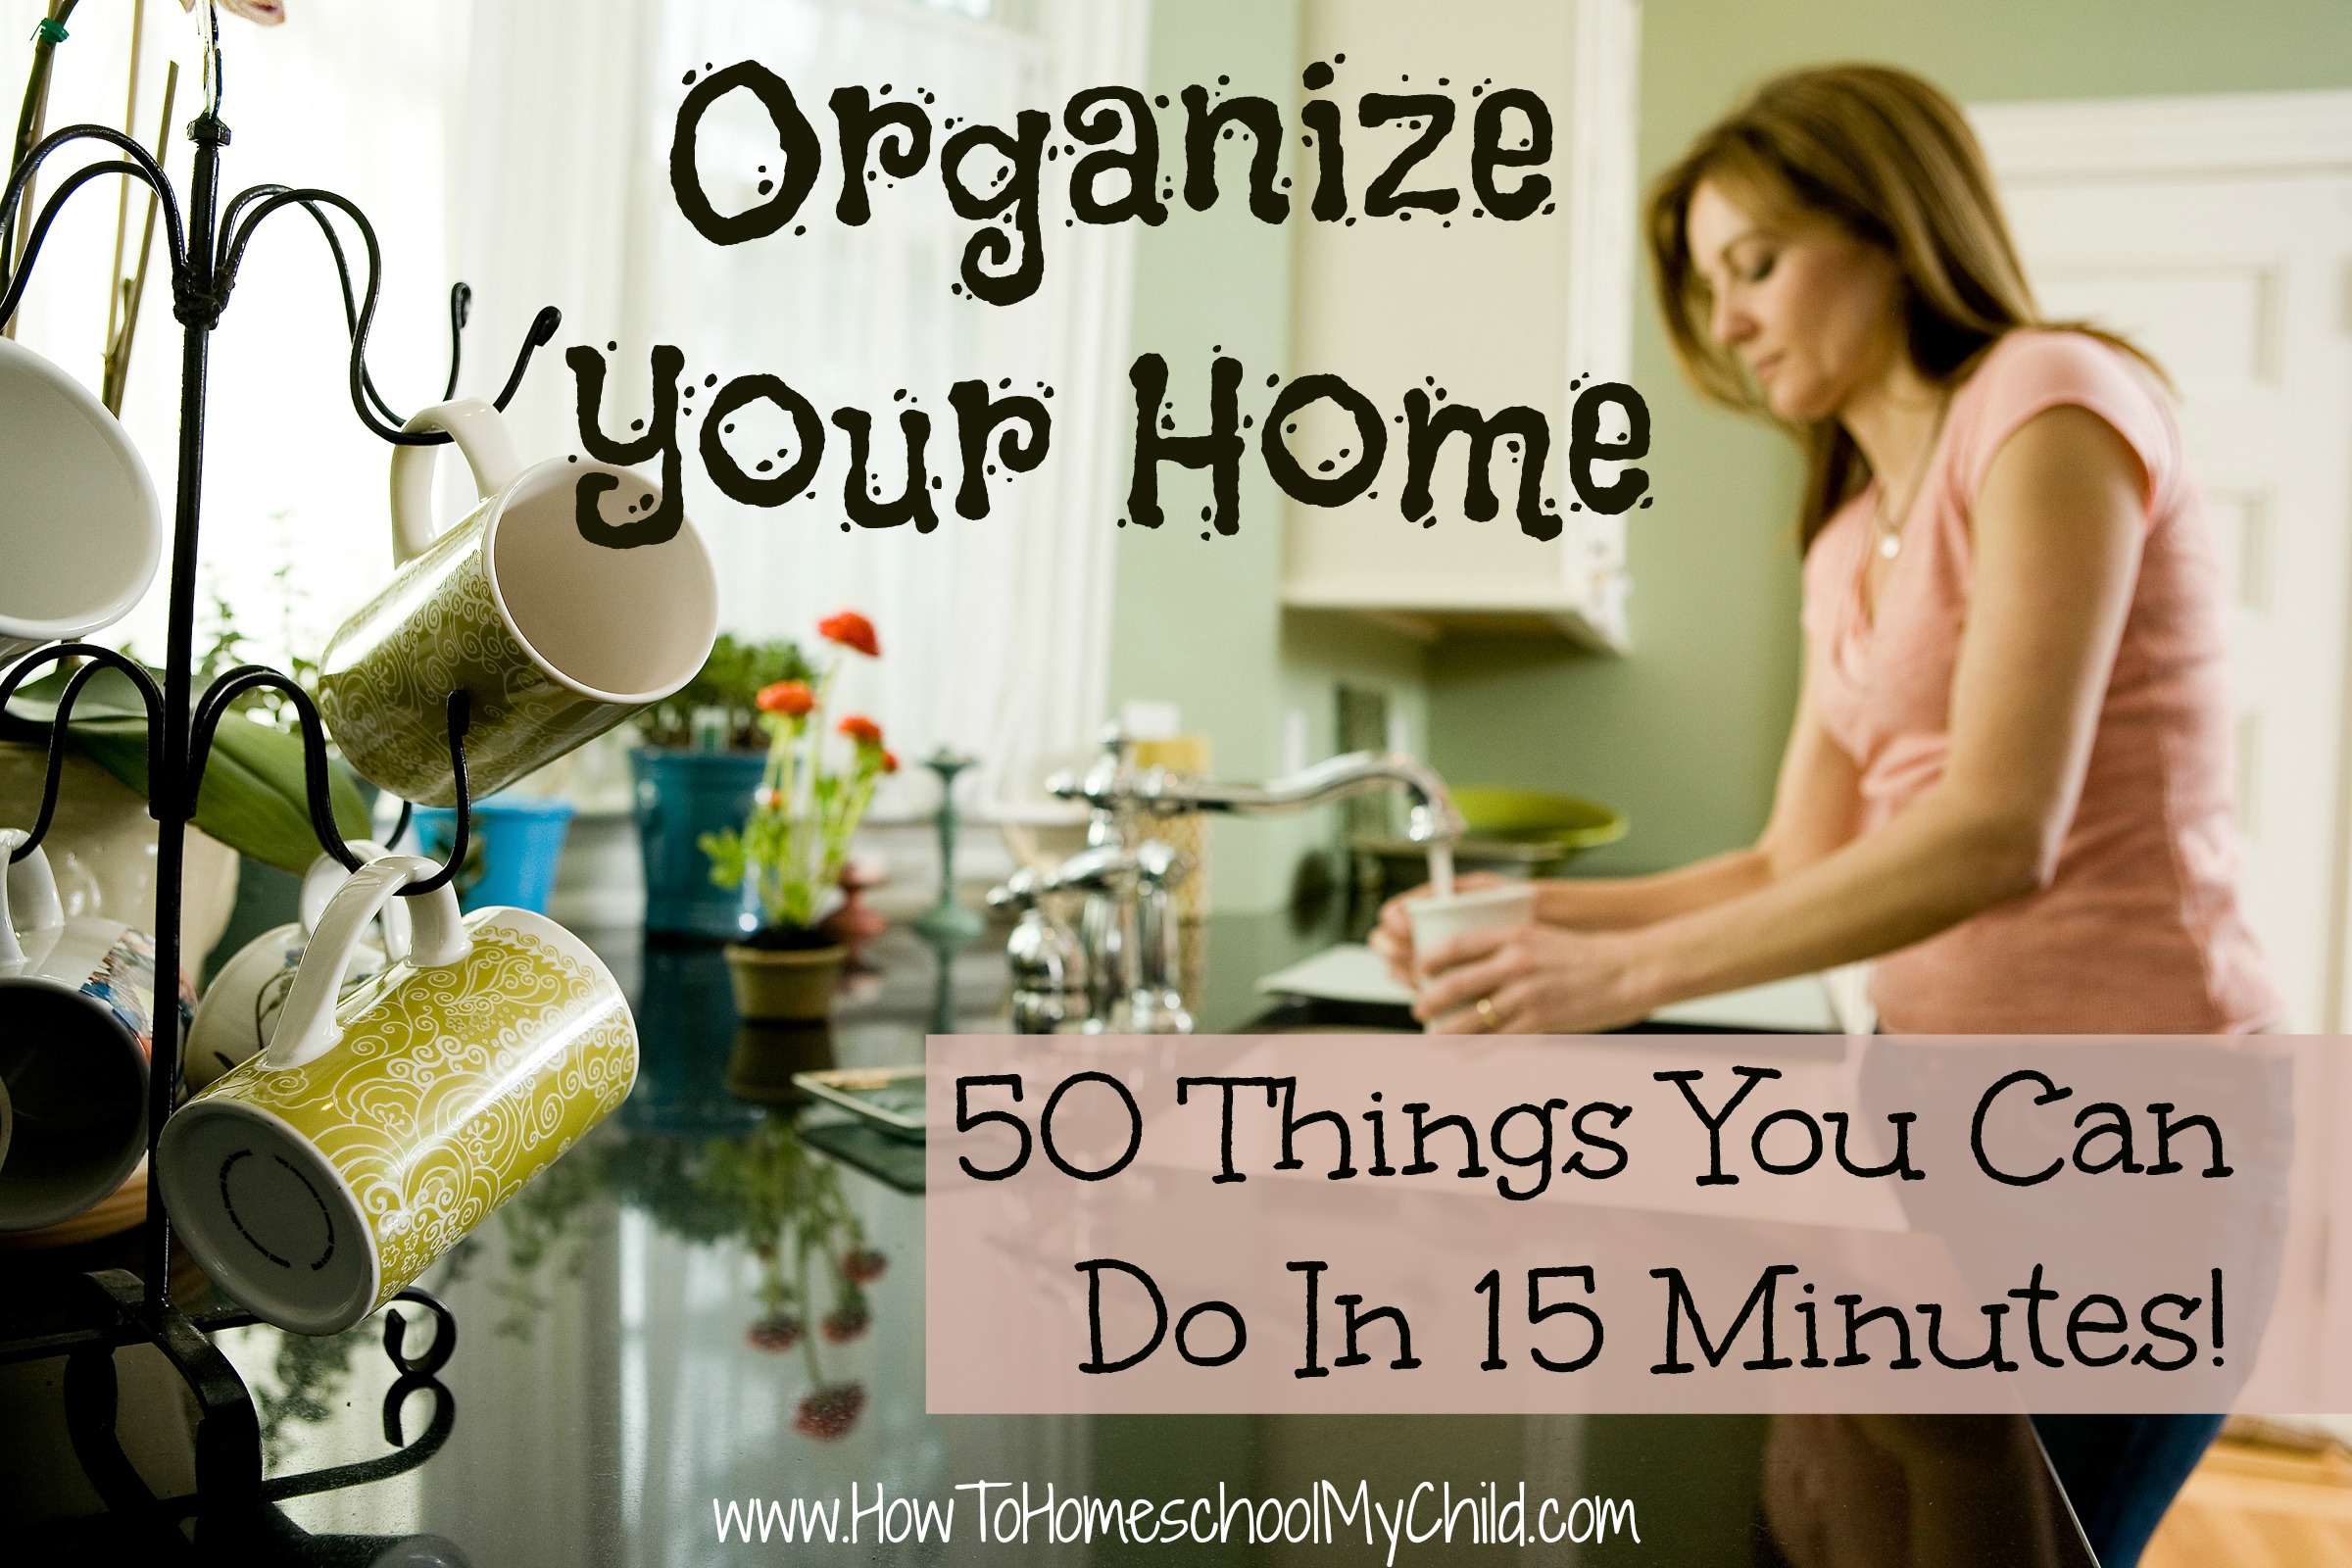 Discover 50 things you can do in 15 minutes to organize your home! Check out www.HowToHomeschoolMyChild.com